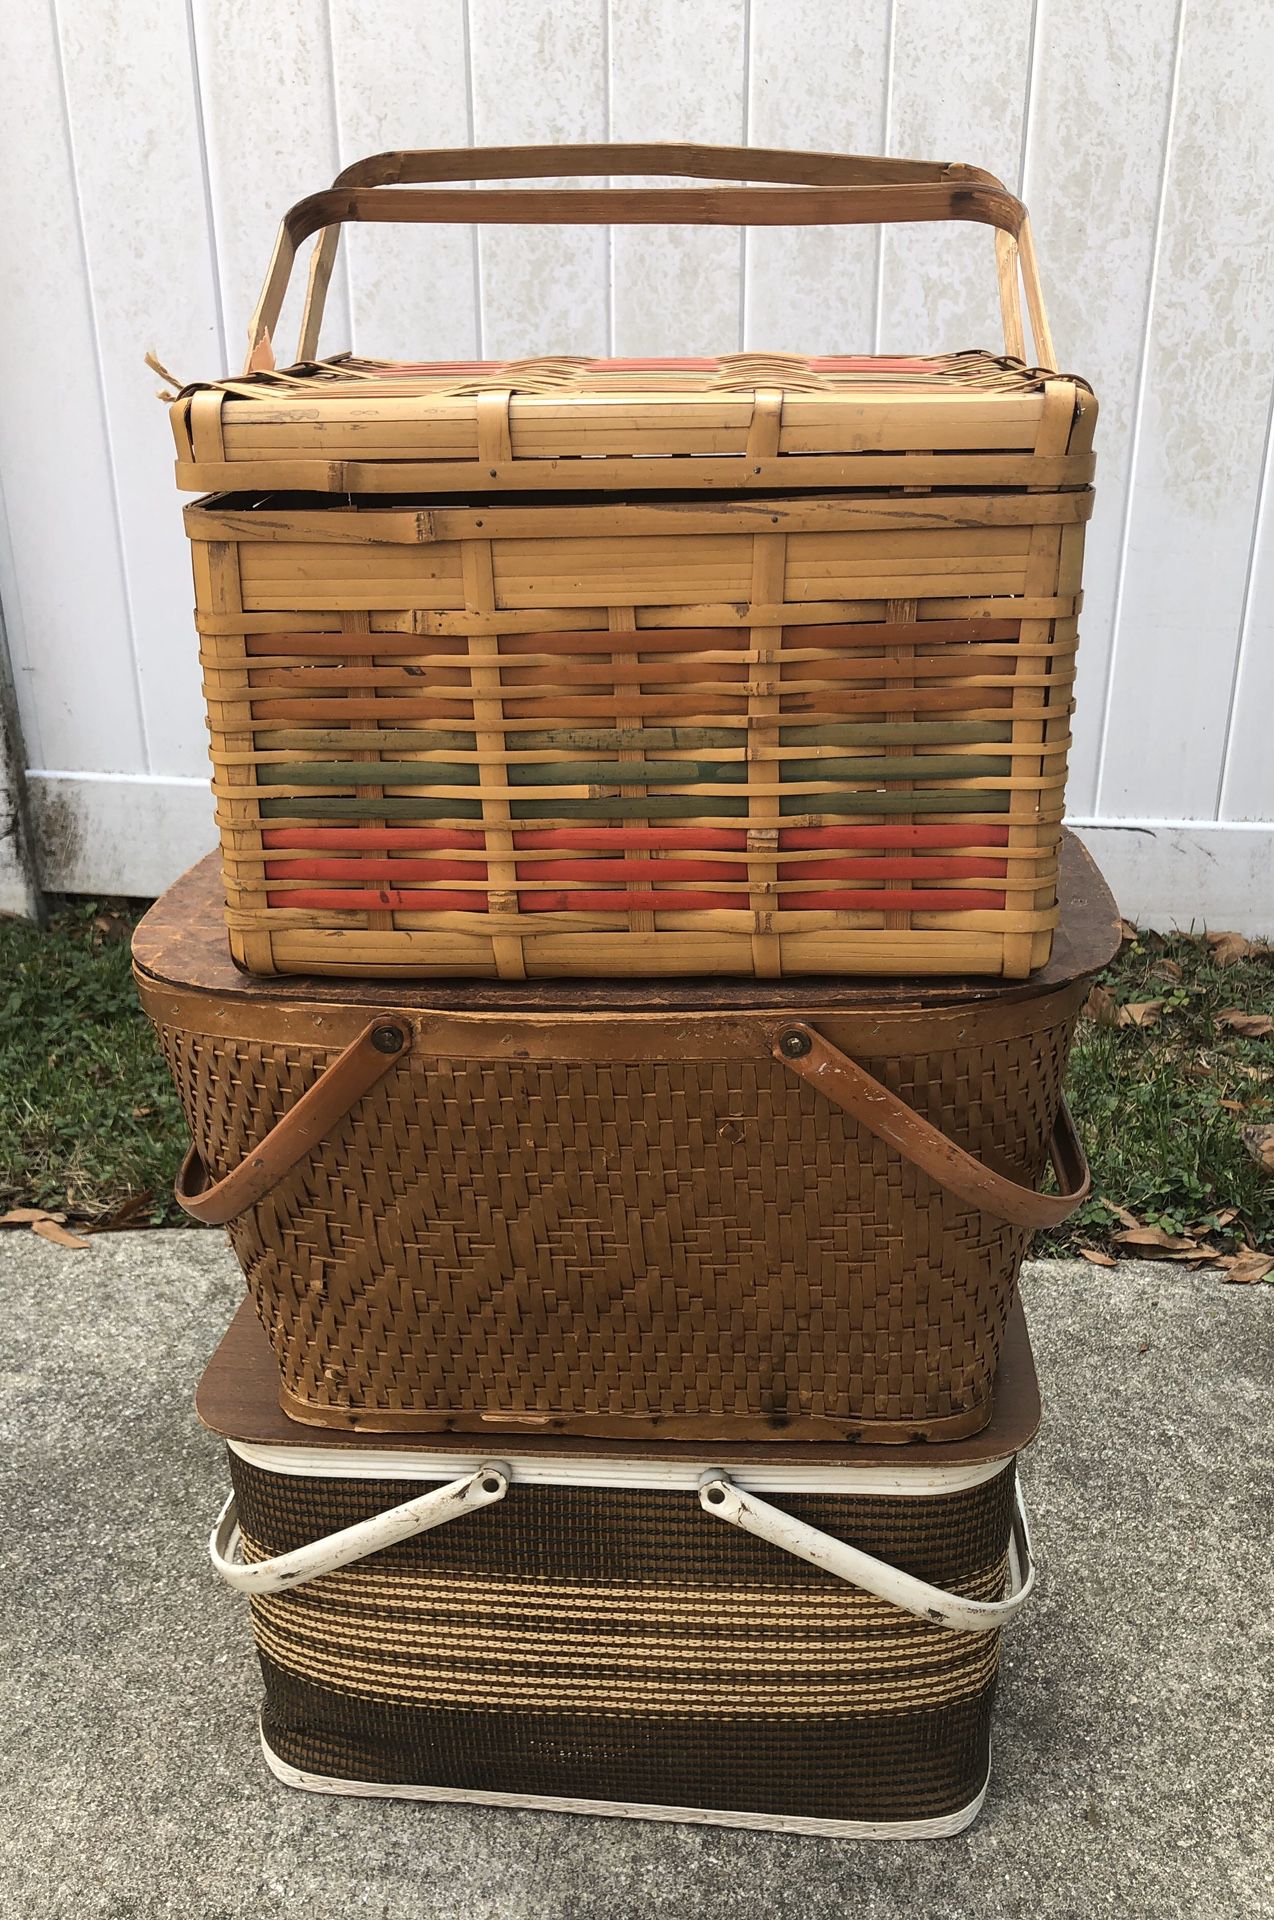 Vintage Picnic Baskets $10 each or all $25